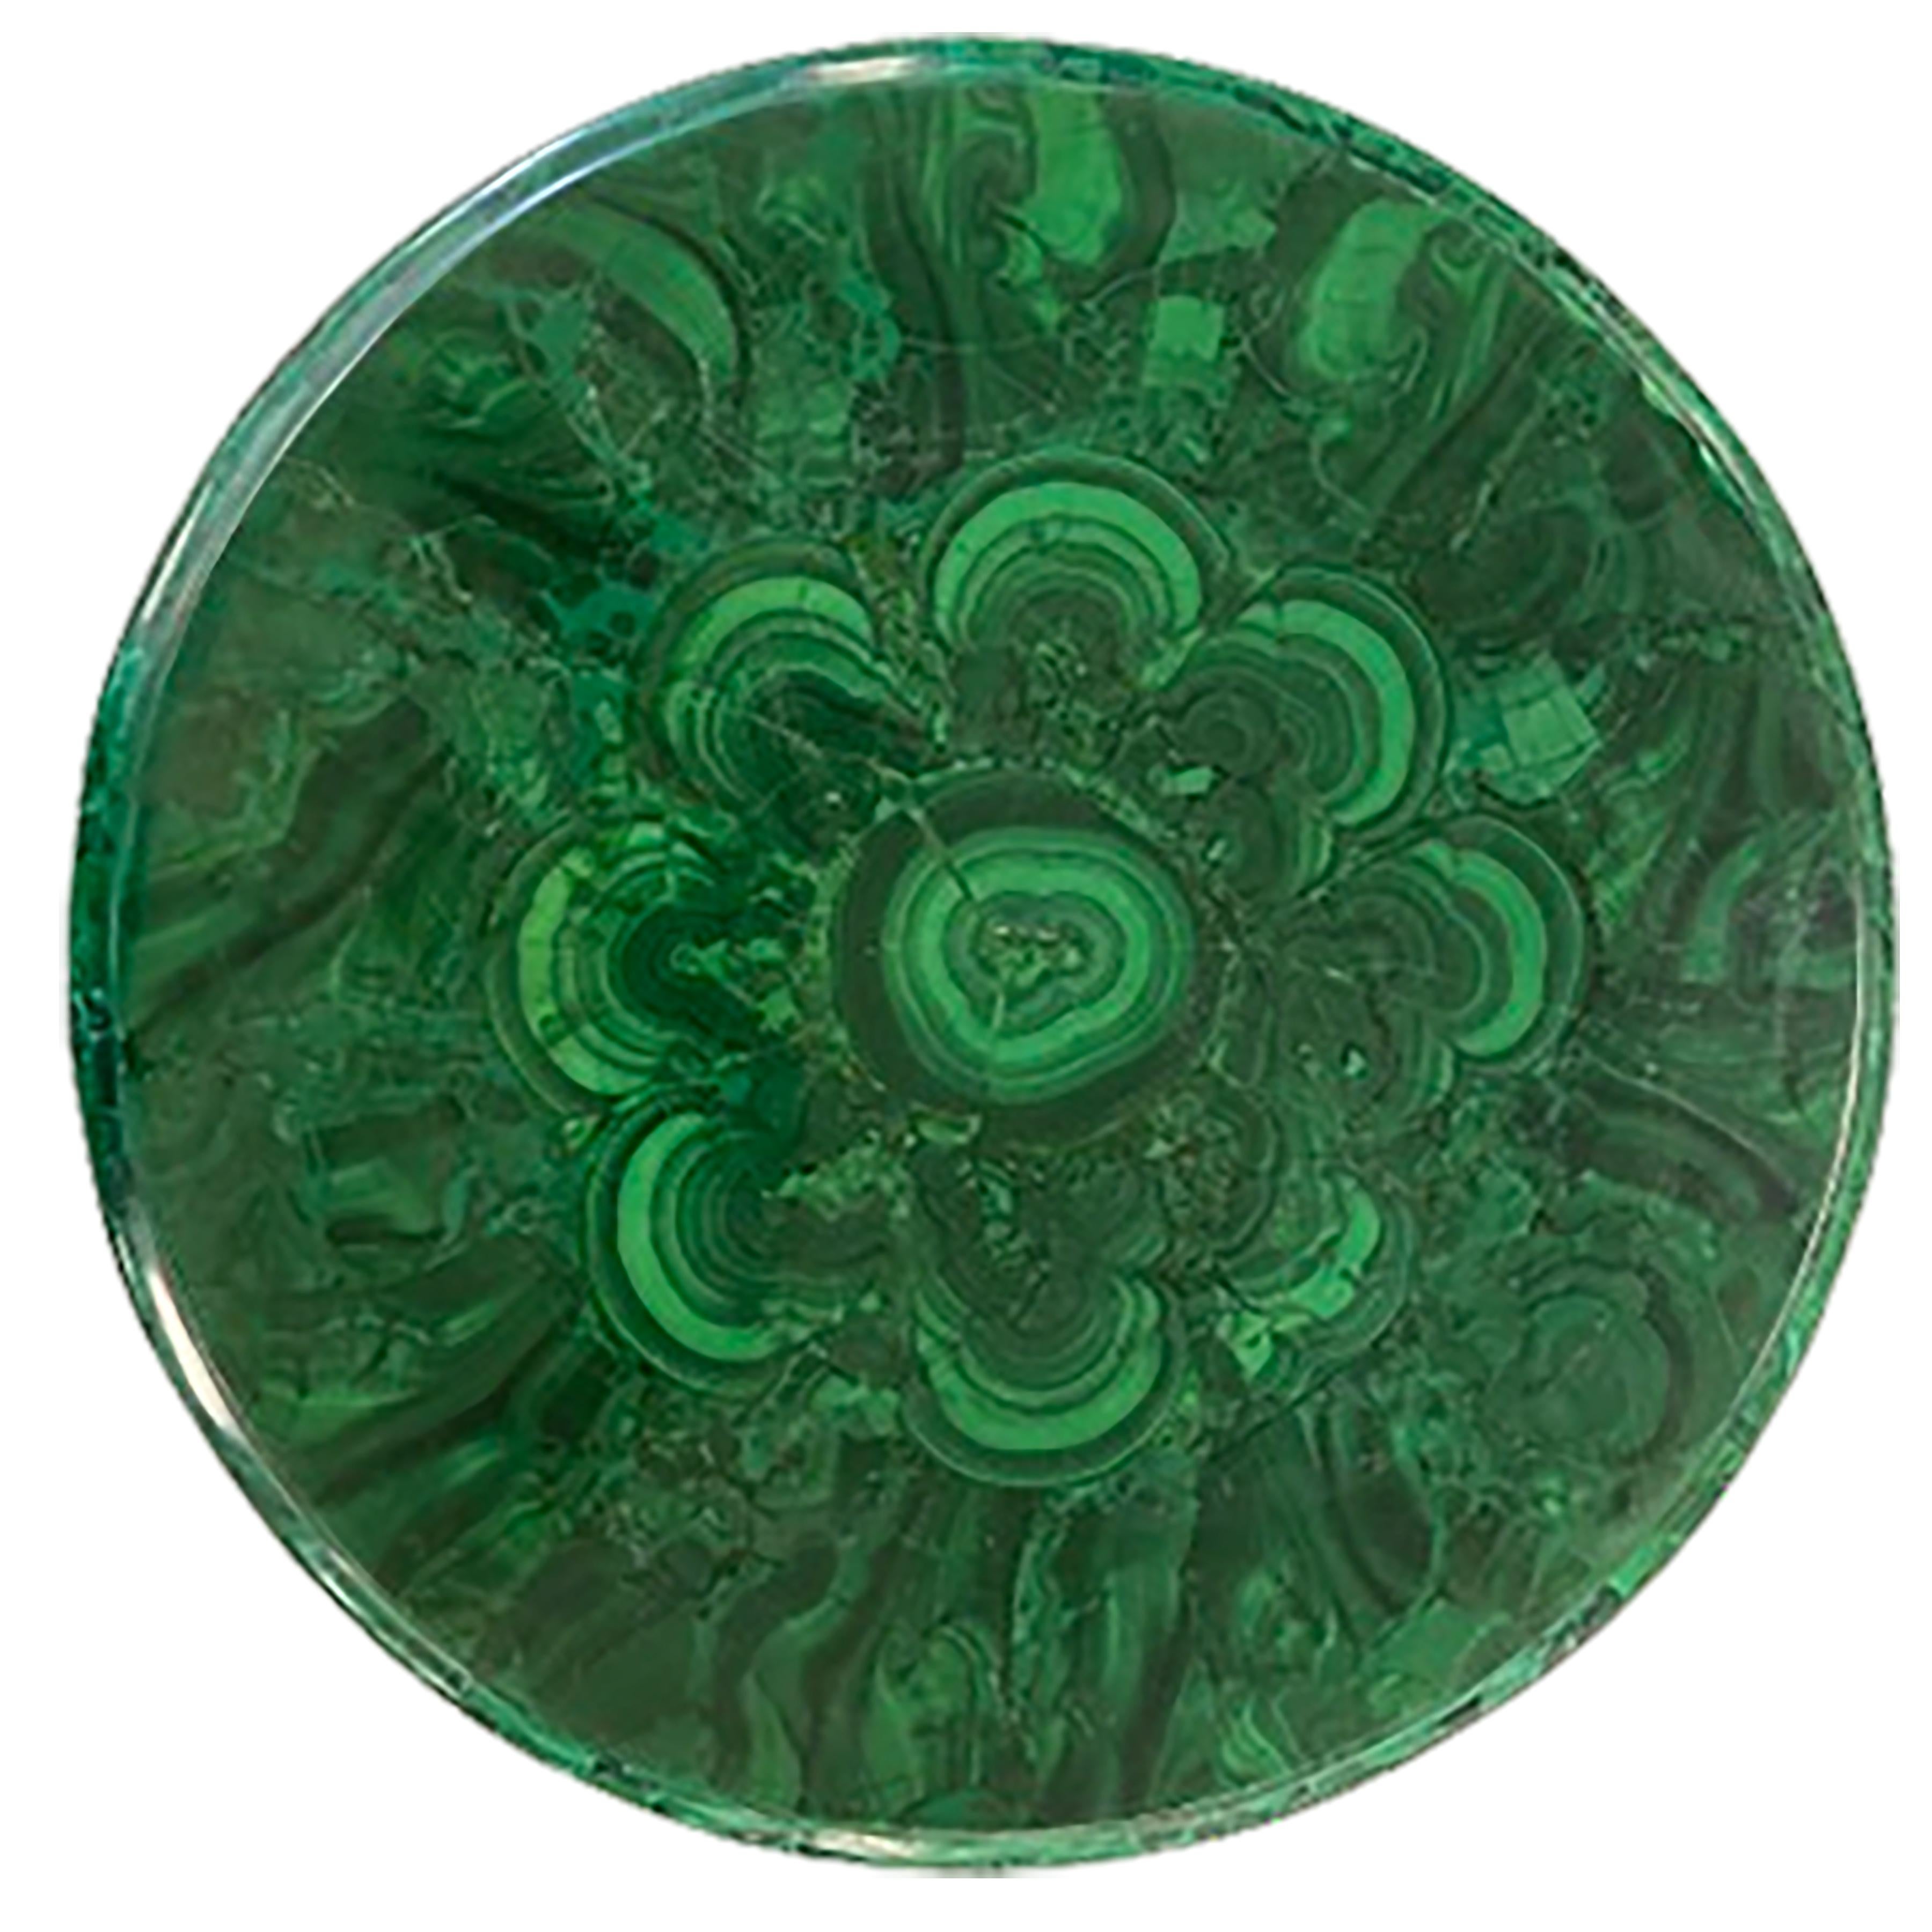 A charming Empire antique malachite side table with detailed features and ormolu legs. The vibrant organic green of the table top contrasts the finely crafted features that make up the legs and side. The malachite table top is laid in an expanding